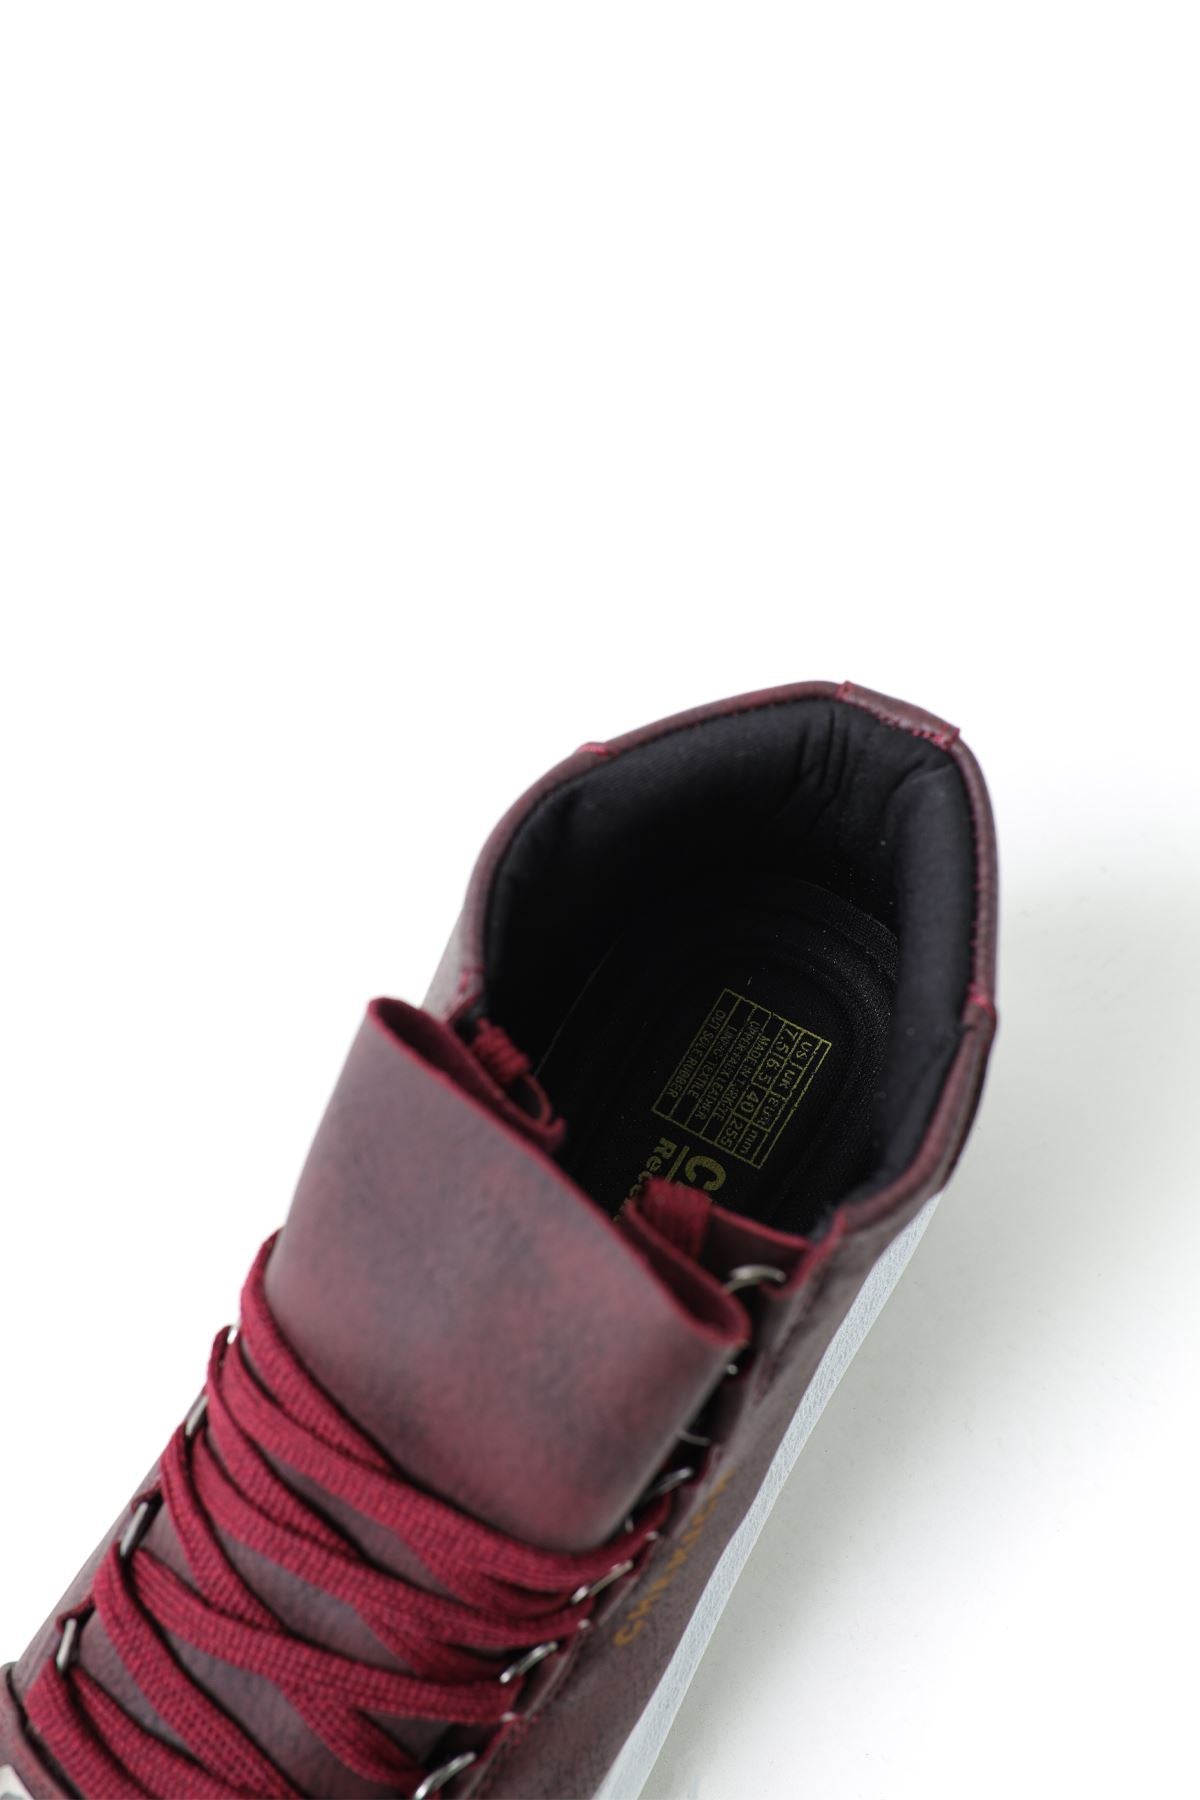 CH267 BT Men's Boots MAROON - STREETMODE ™